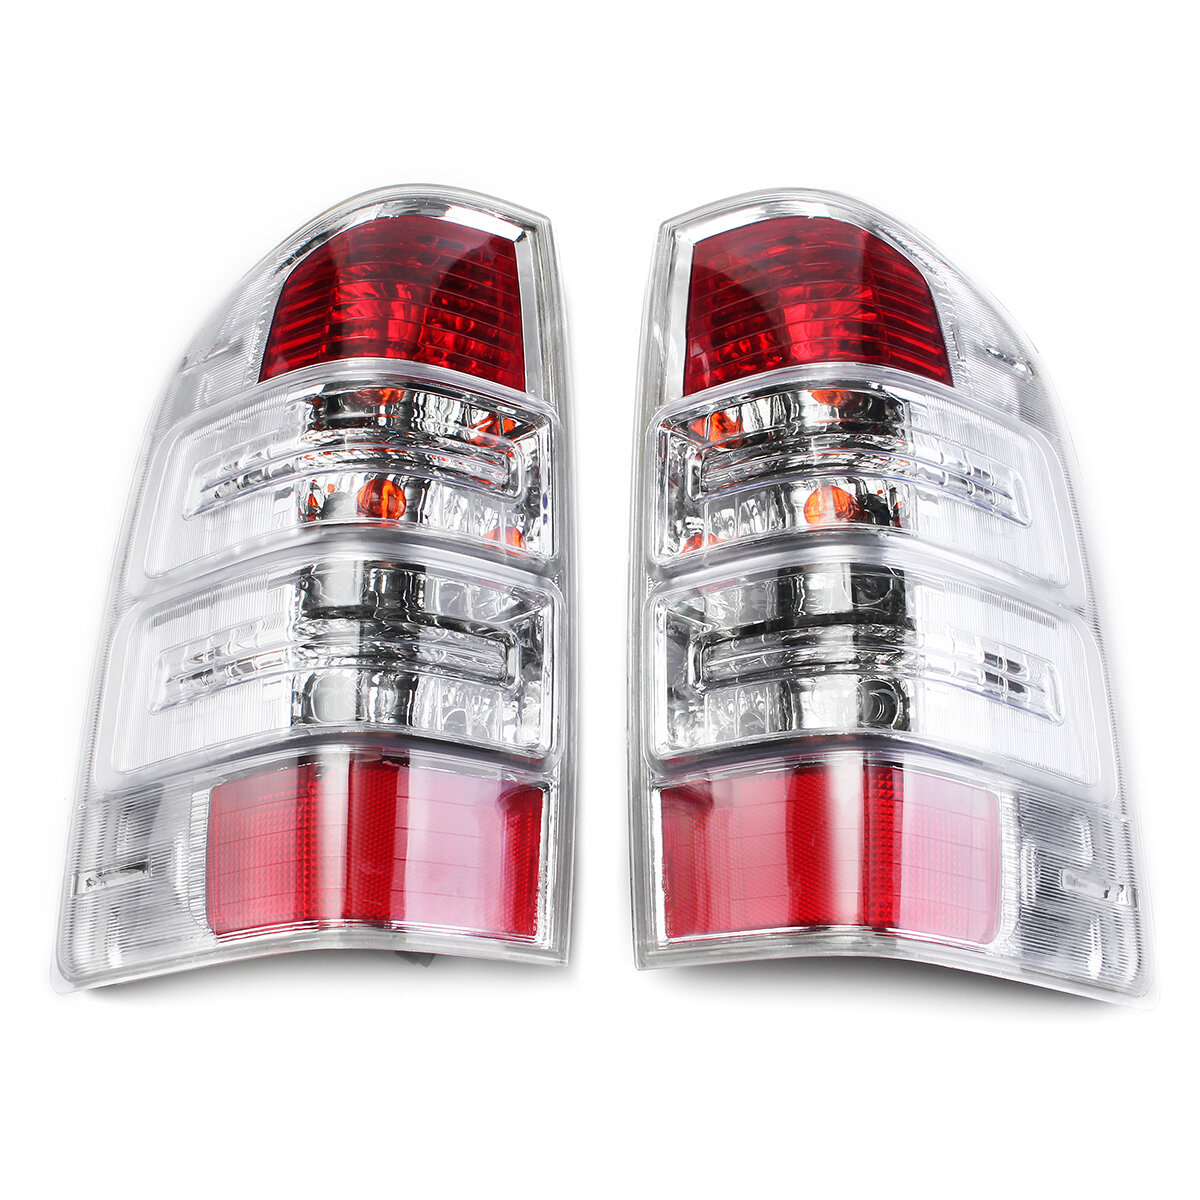 Image of Car Rear Tail Light Assembly Brake Lamp with Bulb Wiring Harness Left/Right for Ford Ranger Pickup Ute 2008-2011